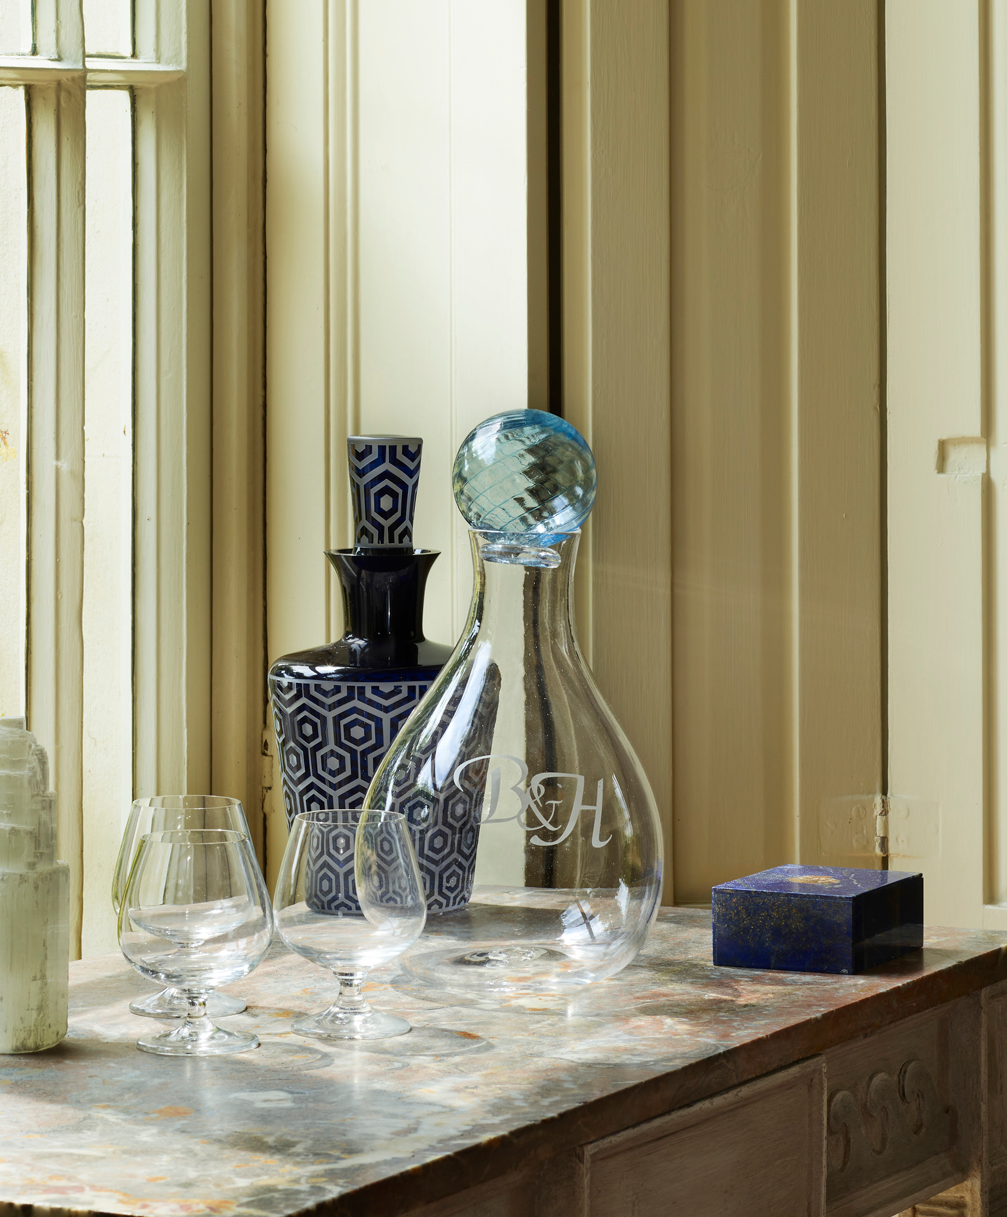 EXPLORE OUR PERSONALISED GLASSWARE COLLECTION